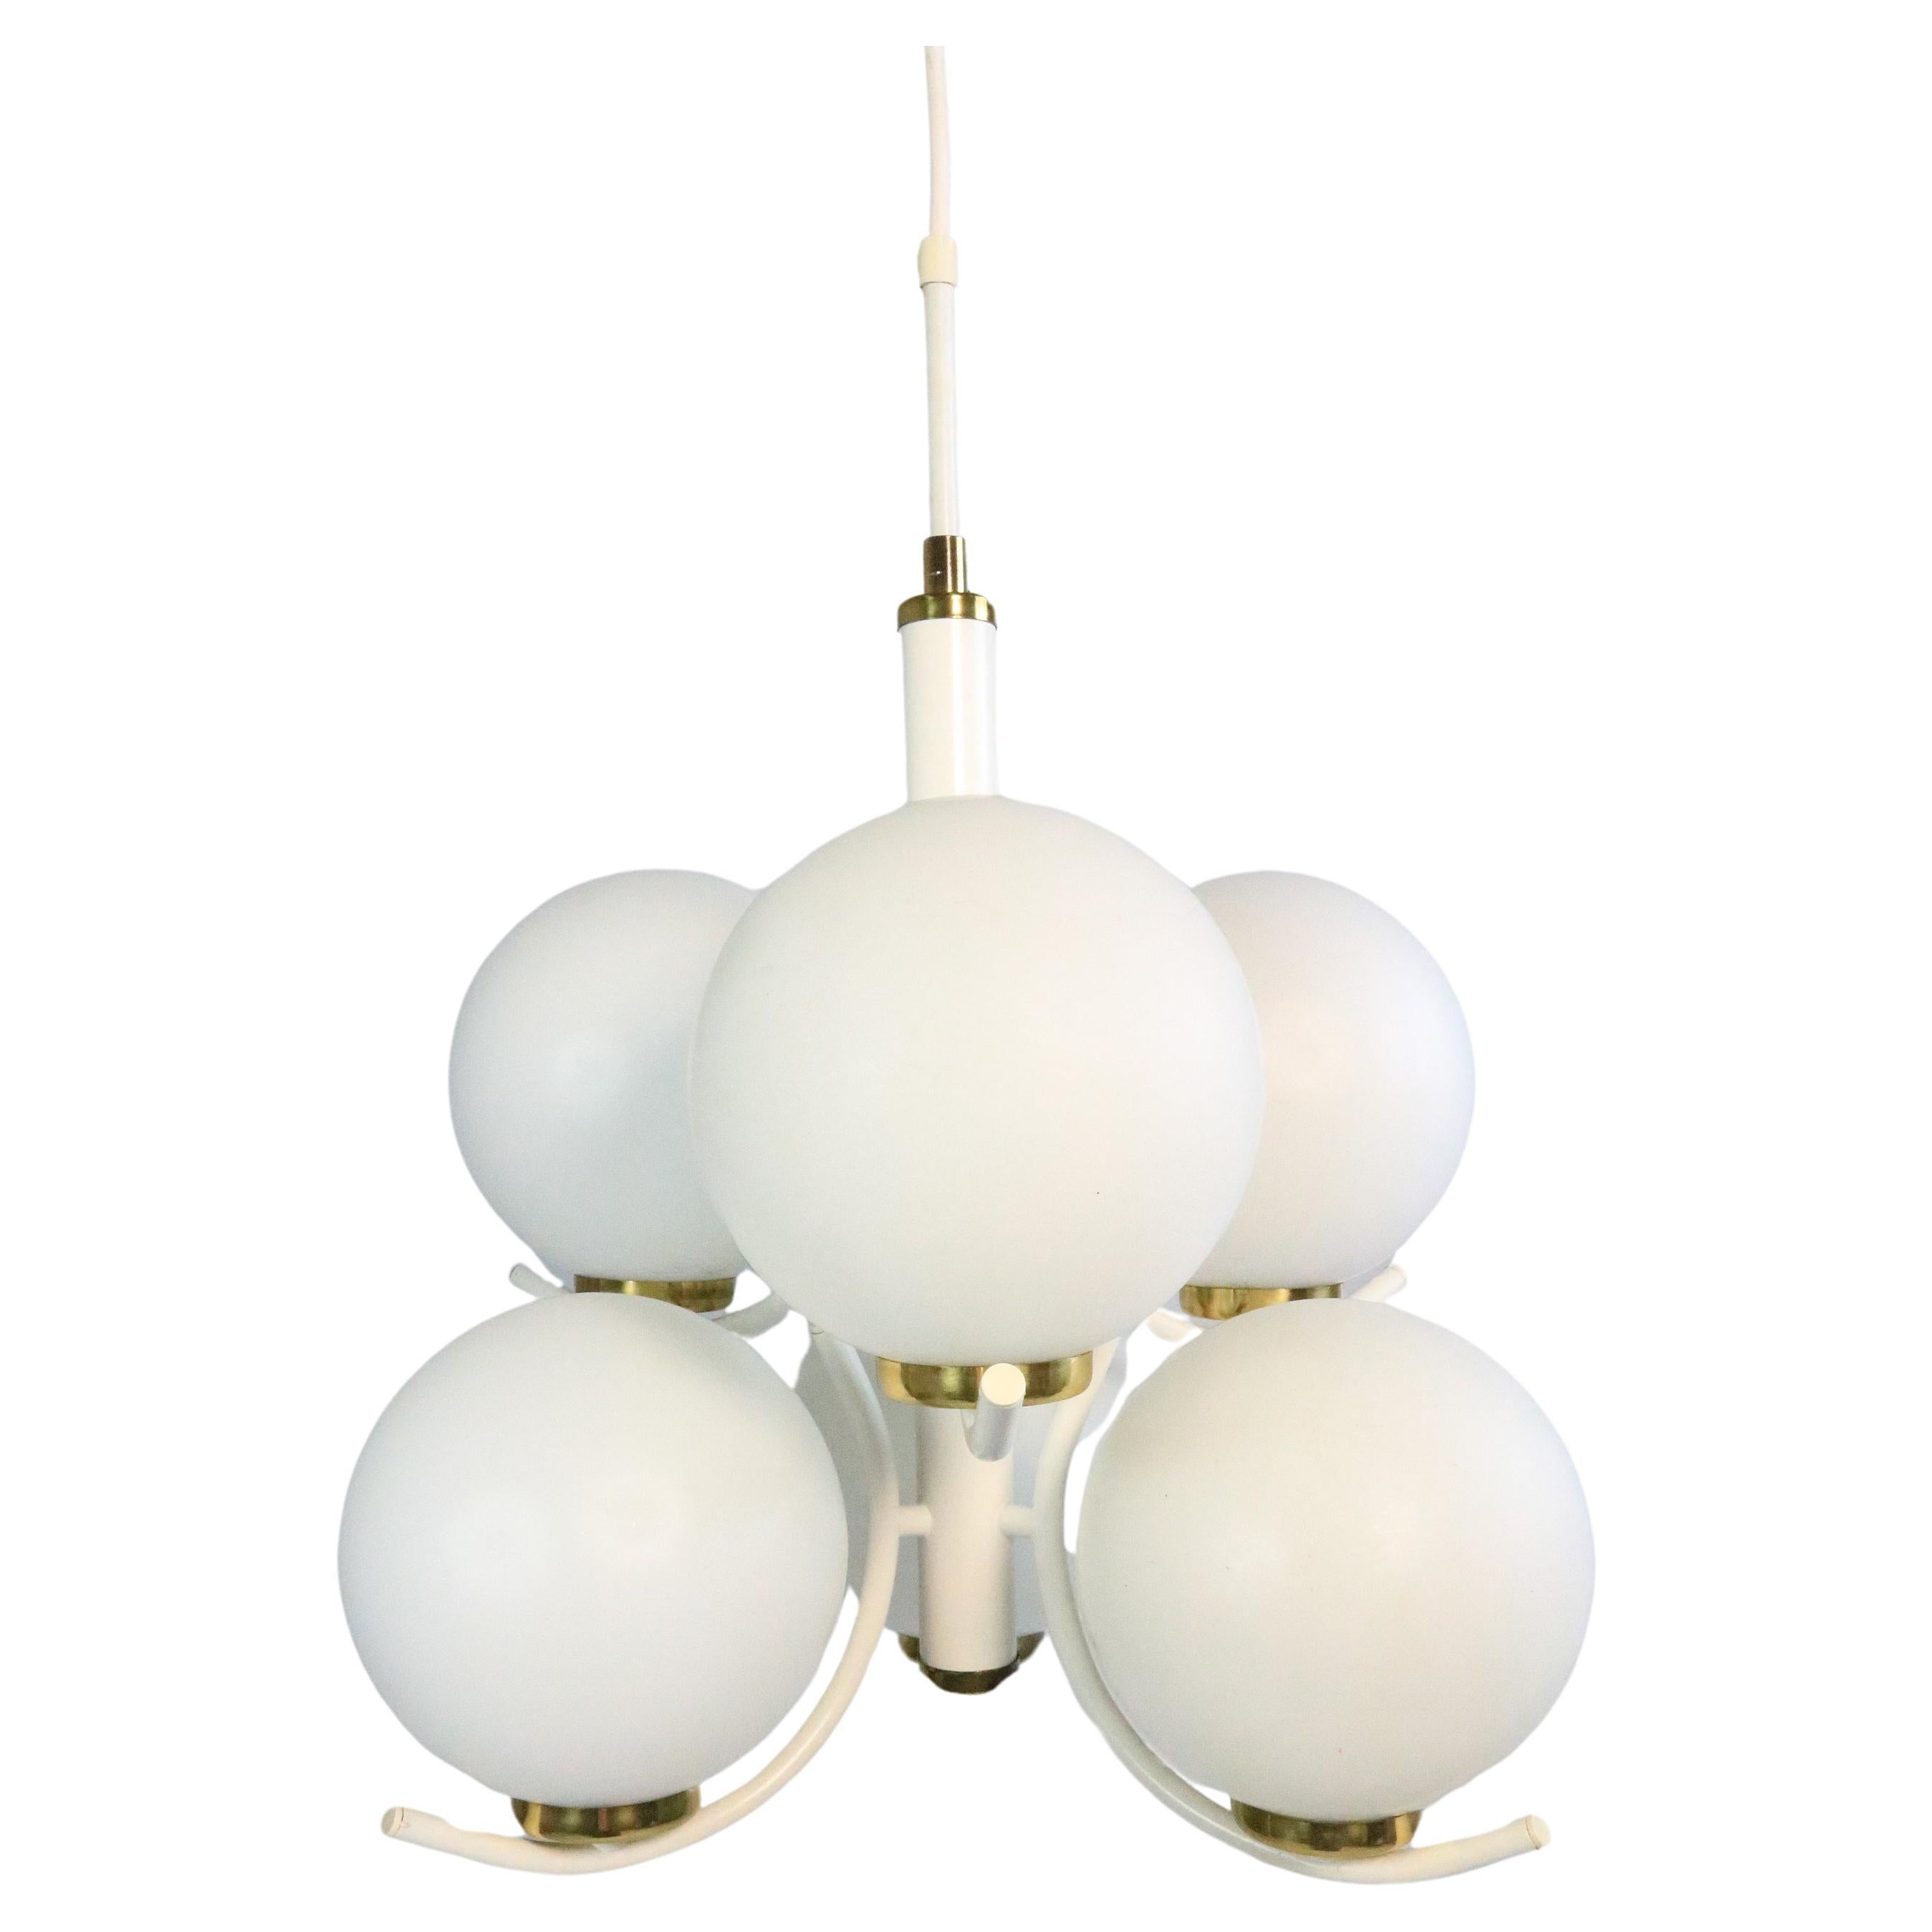 Great classic, original from the 1970s.
 
Sputnik lamp with 6 opal glass globes, white metal frame.
Manufacturer: Richard Essig
 
Total height: 130 cm (new end wiring) / 51.2 inches
Diameter: approx. 40 cm / 15.75 inches
 
In very good condition,